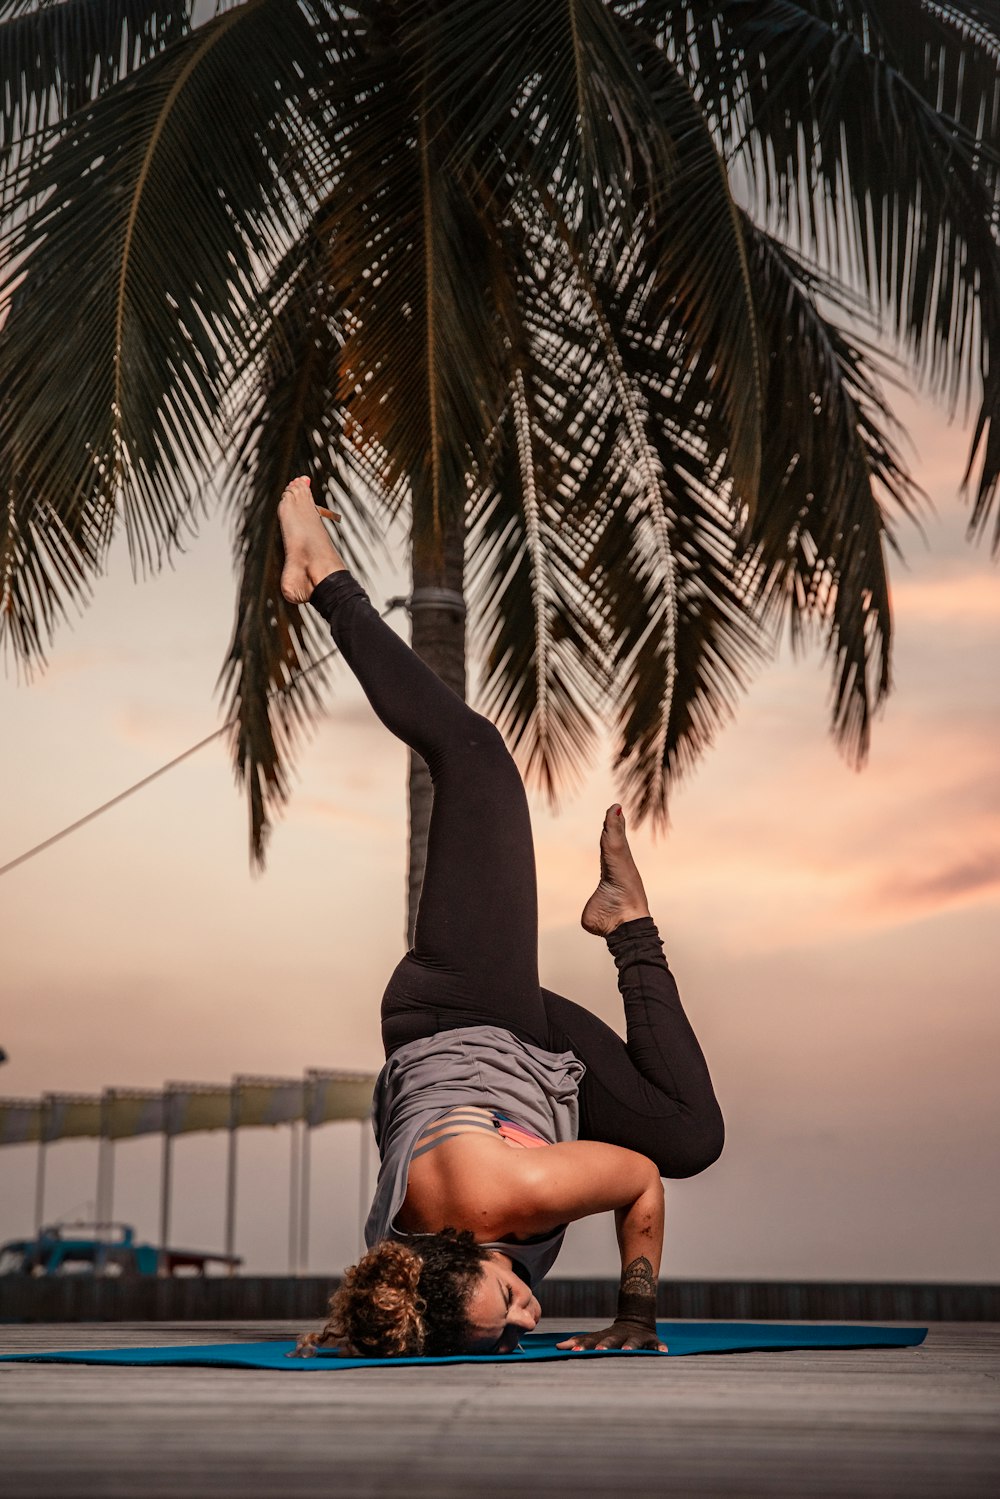 a woman doing a handstand on a surfboard under a palm tree